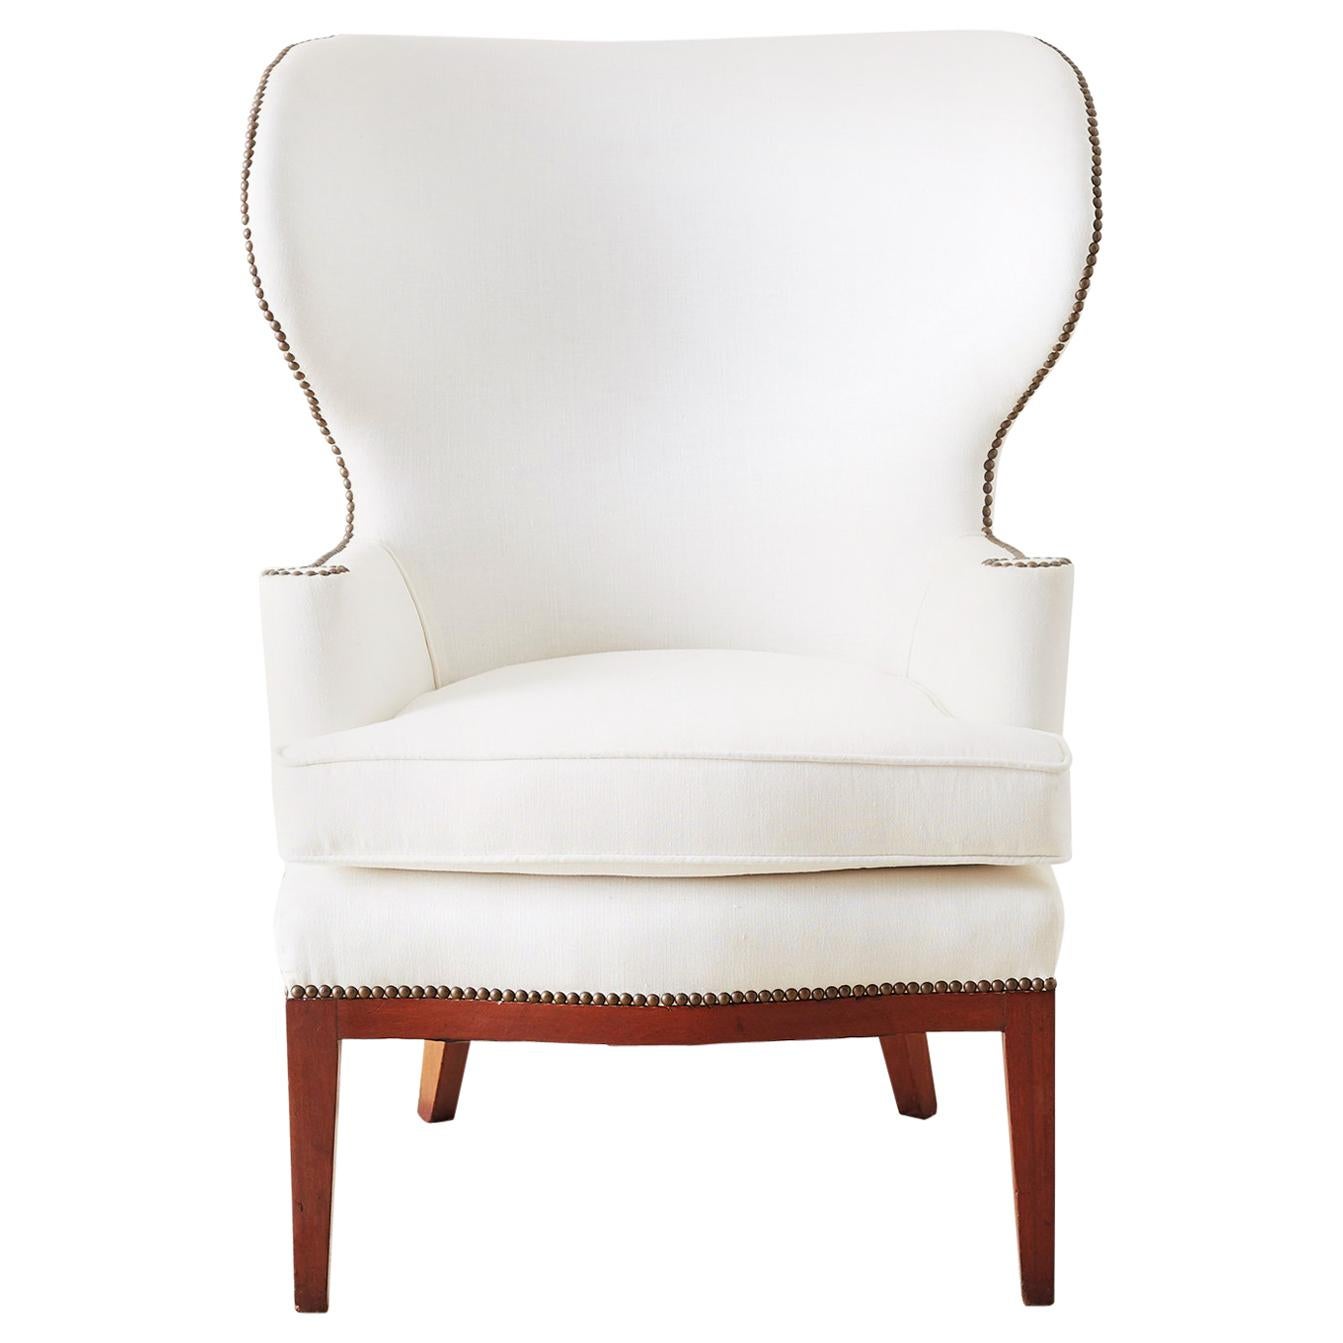 Midcentury Wing Chair by Edward Wormley for Dunbar